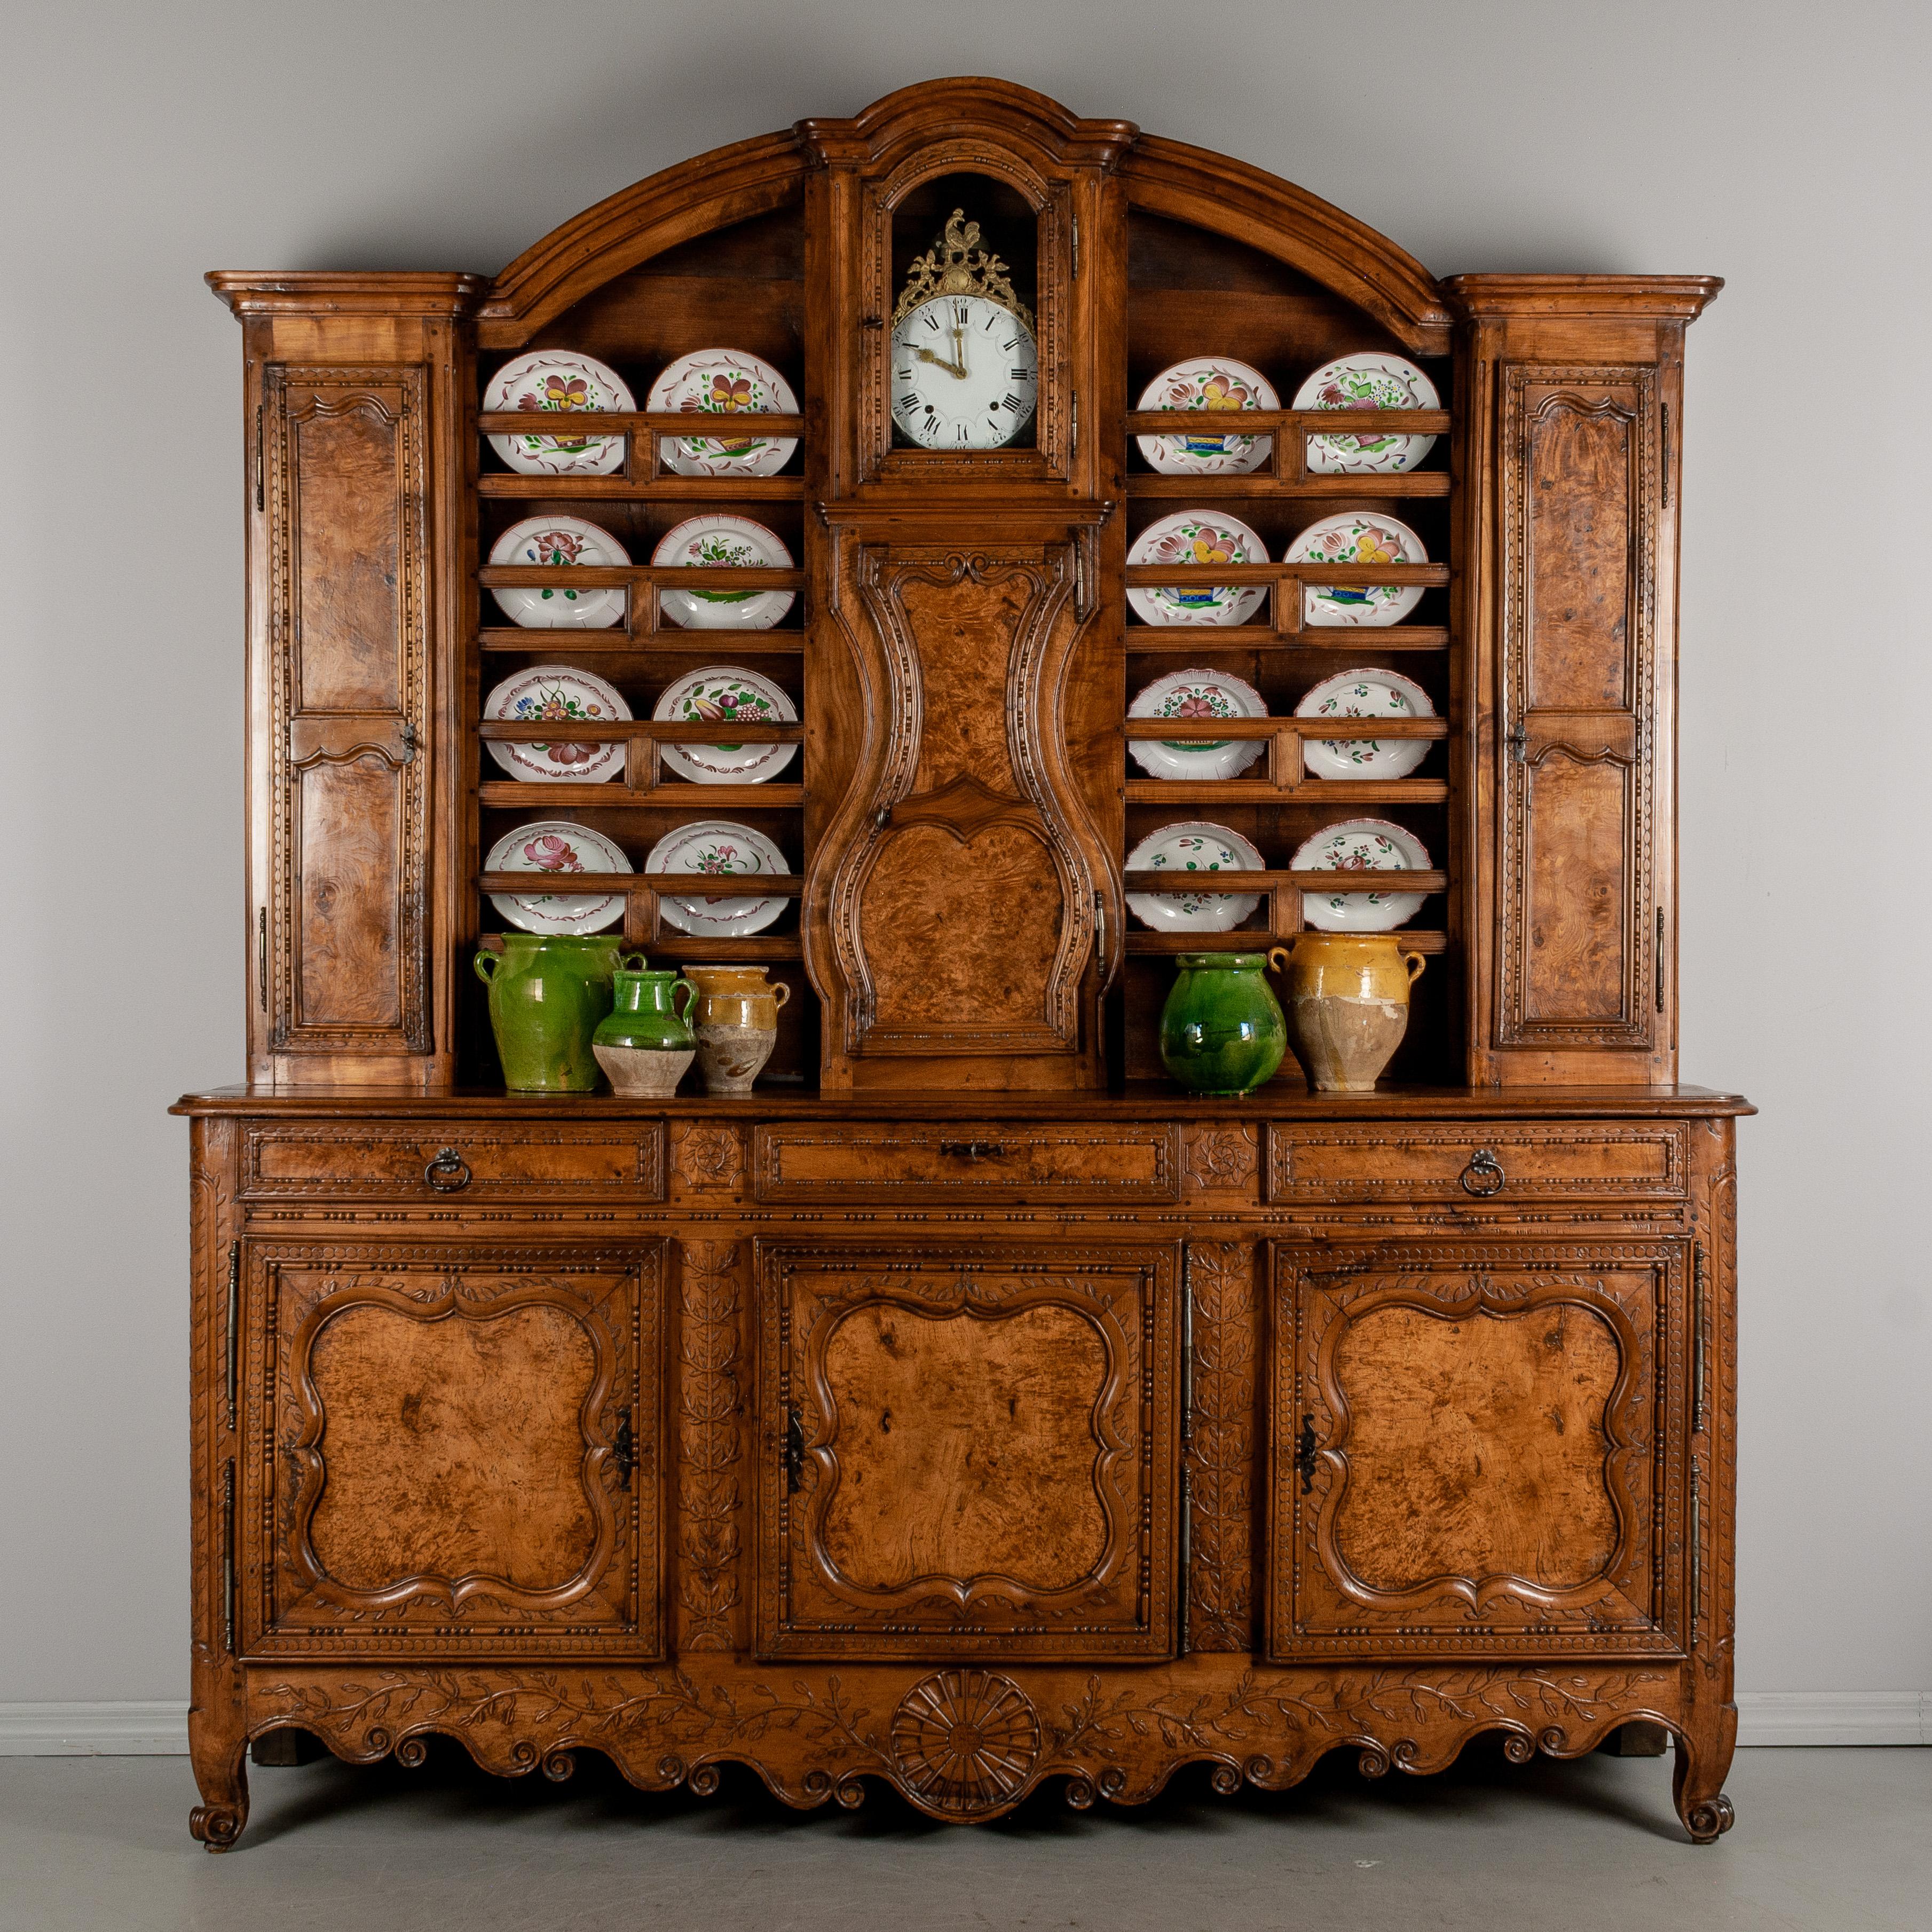 An 18th century Country French vaisselier from Burgundy comprised of a large buffet and a china hutch with clock. Made of solid cherry and walnut and highly decorated with hand-carved vines framing beautifully patterned burl of elm wood panels.